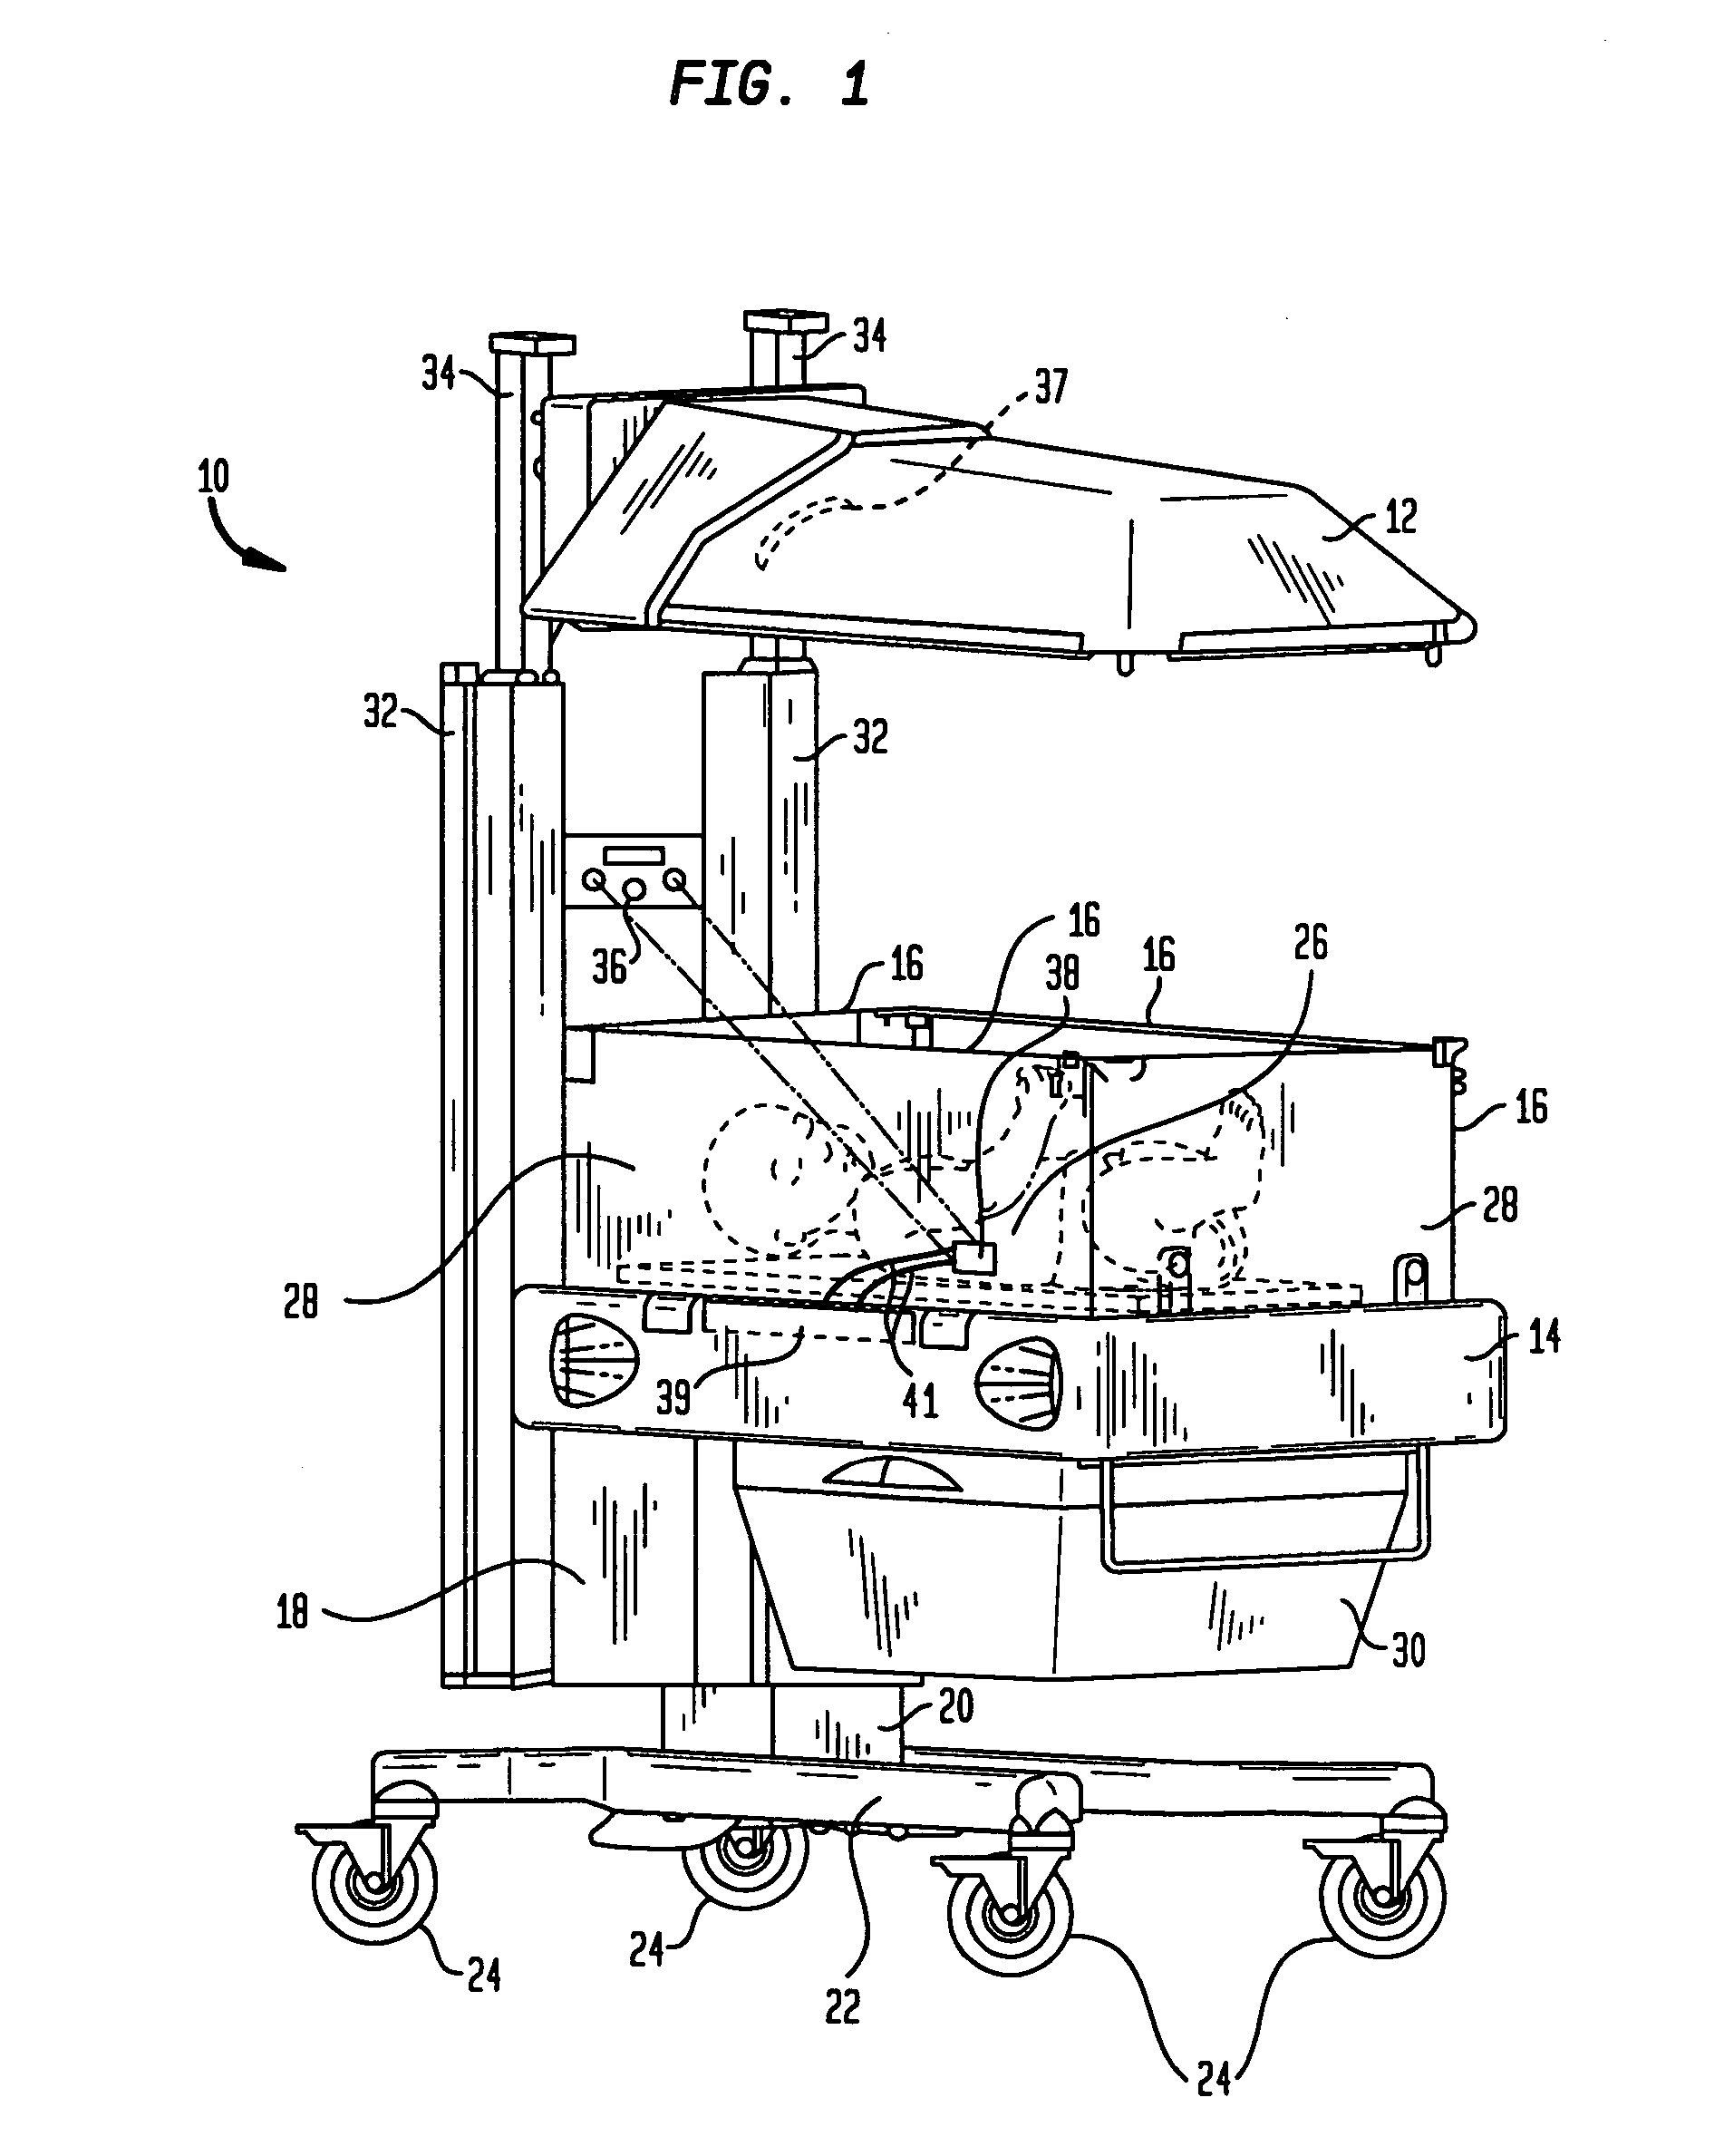 Telemetry sensing system for infant care apparatus